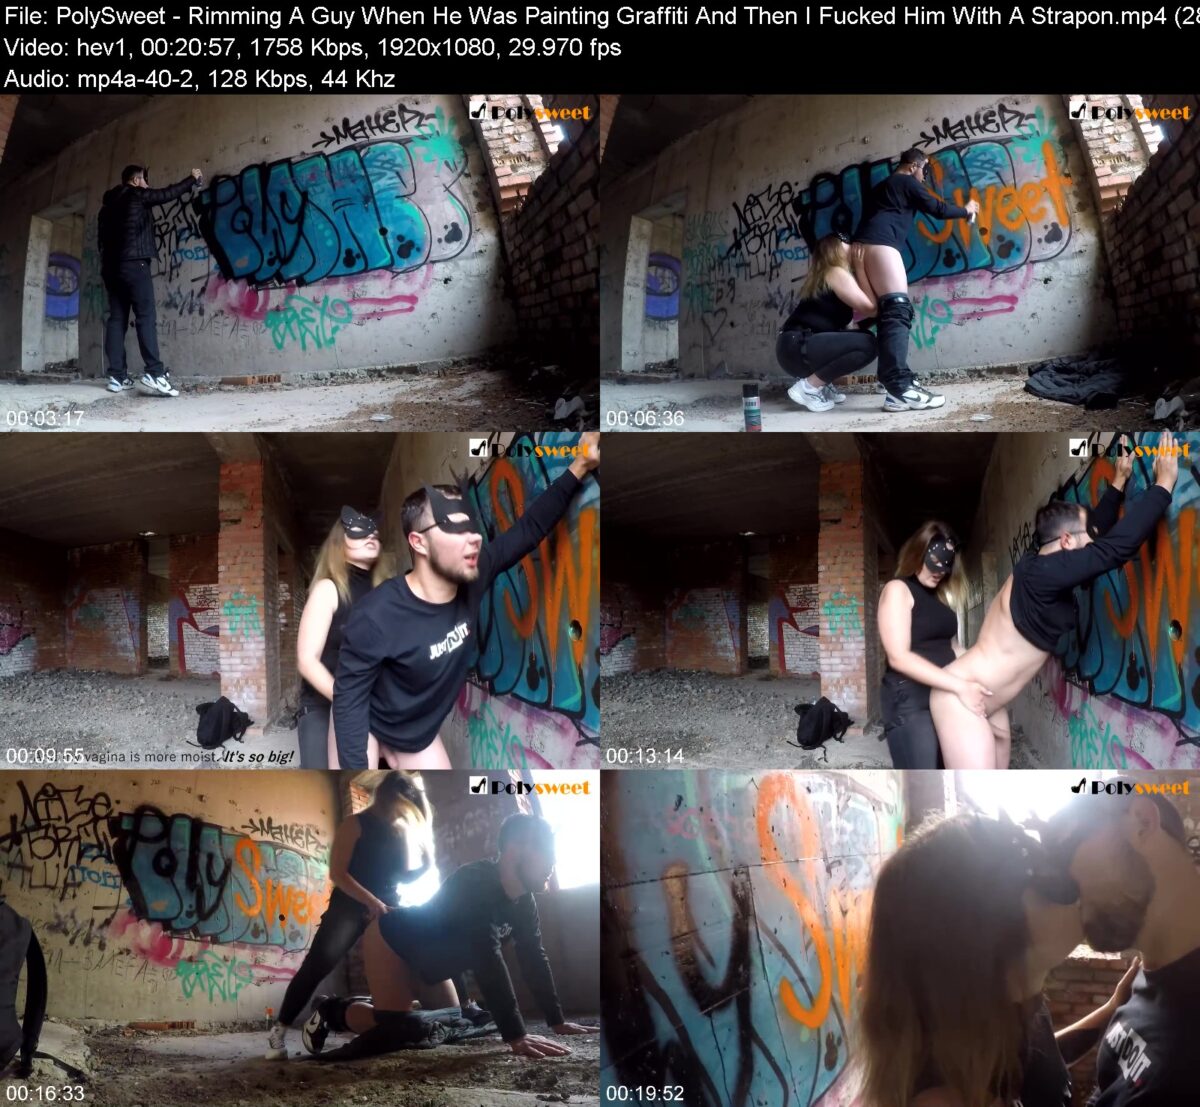 Actress: PolySweet. Title and Studio: Rimming A Guy When He Was Painting Graffiti And Then I Fucked Him With A Strapon